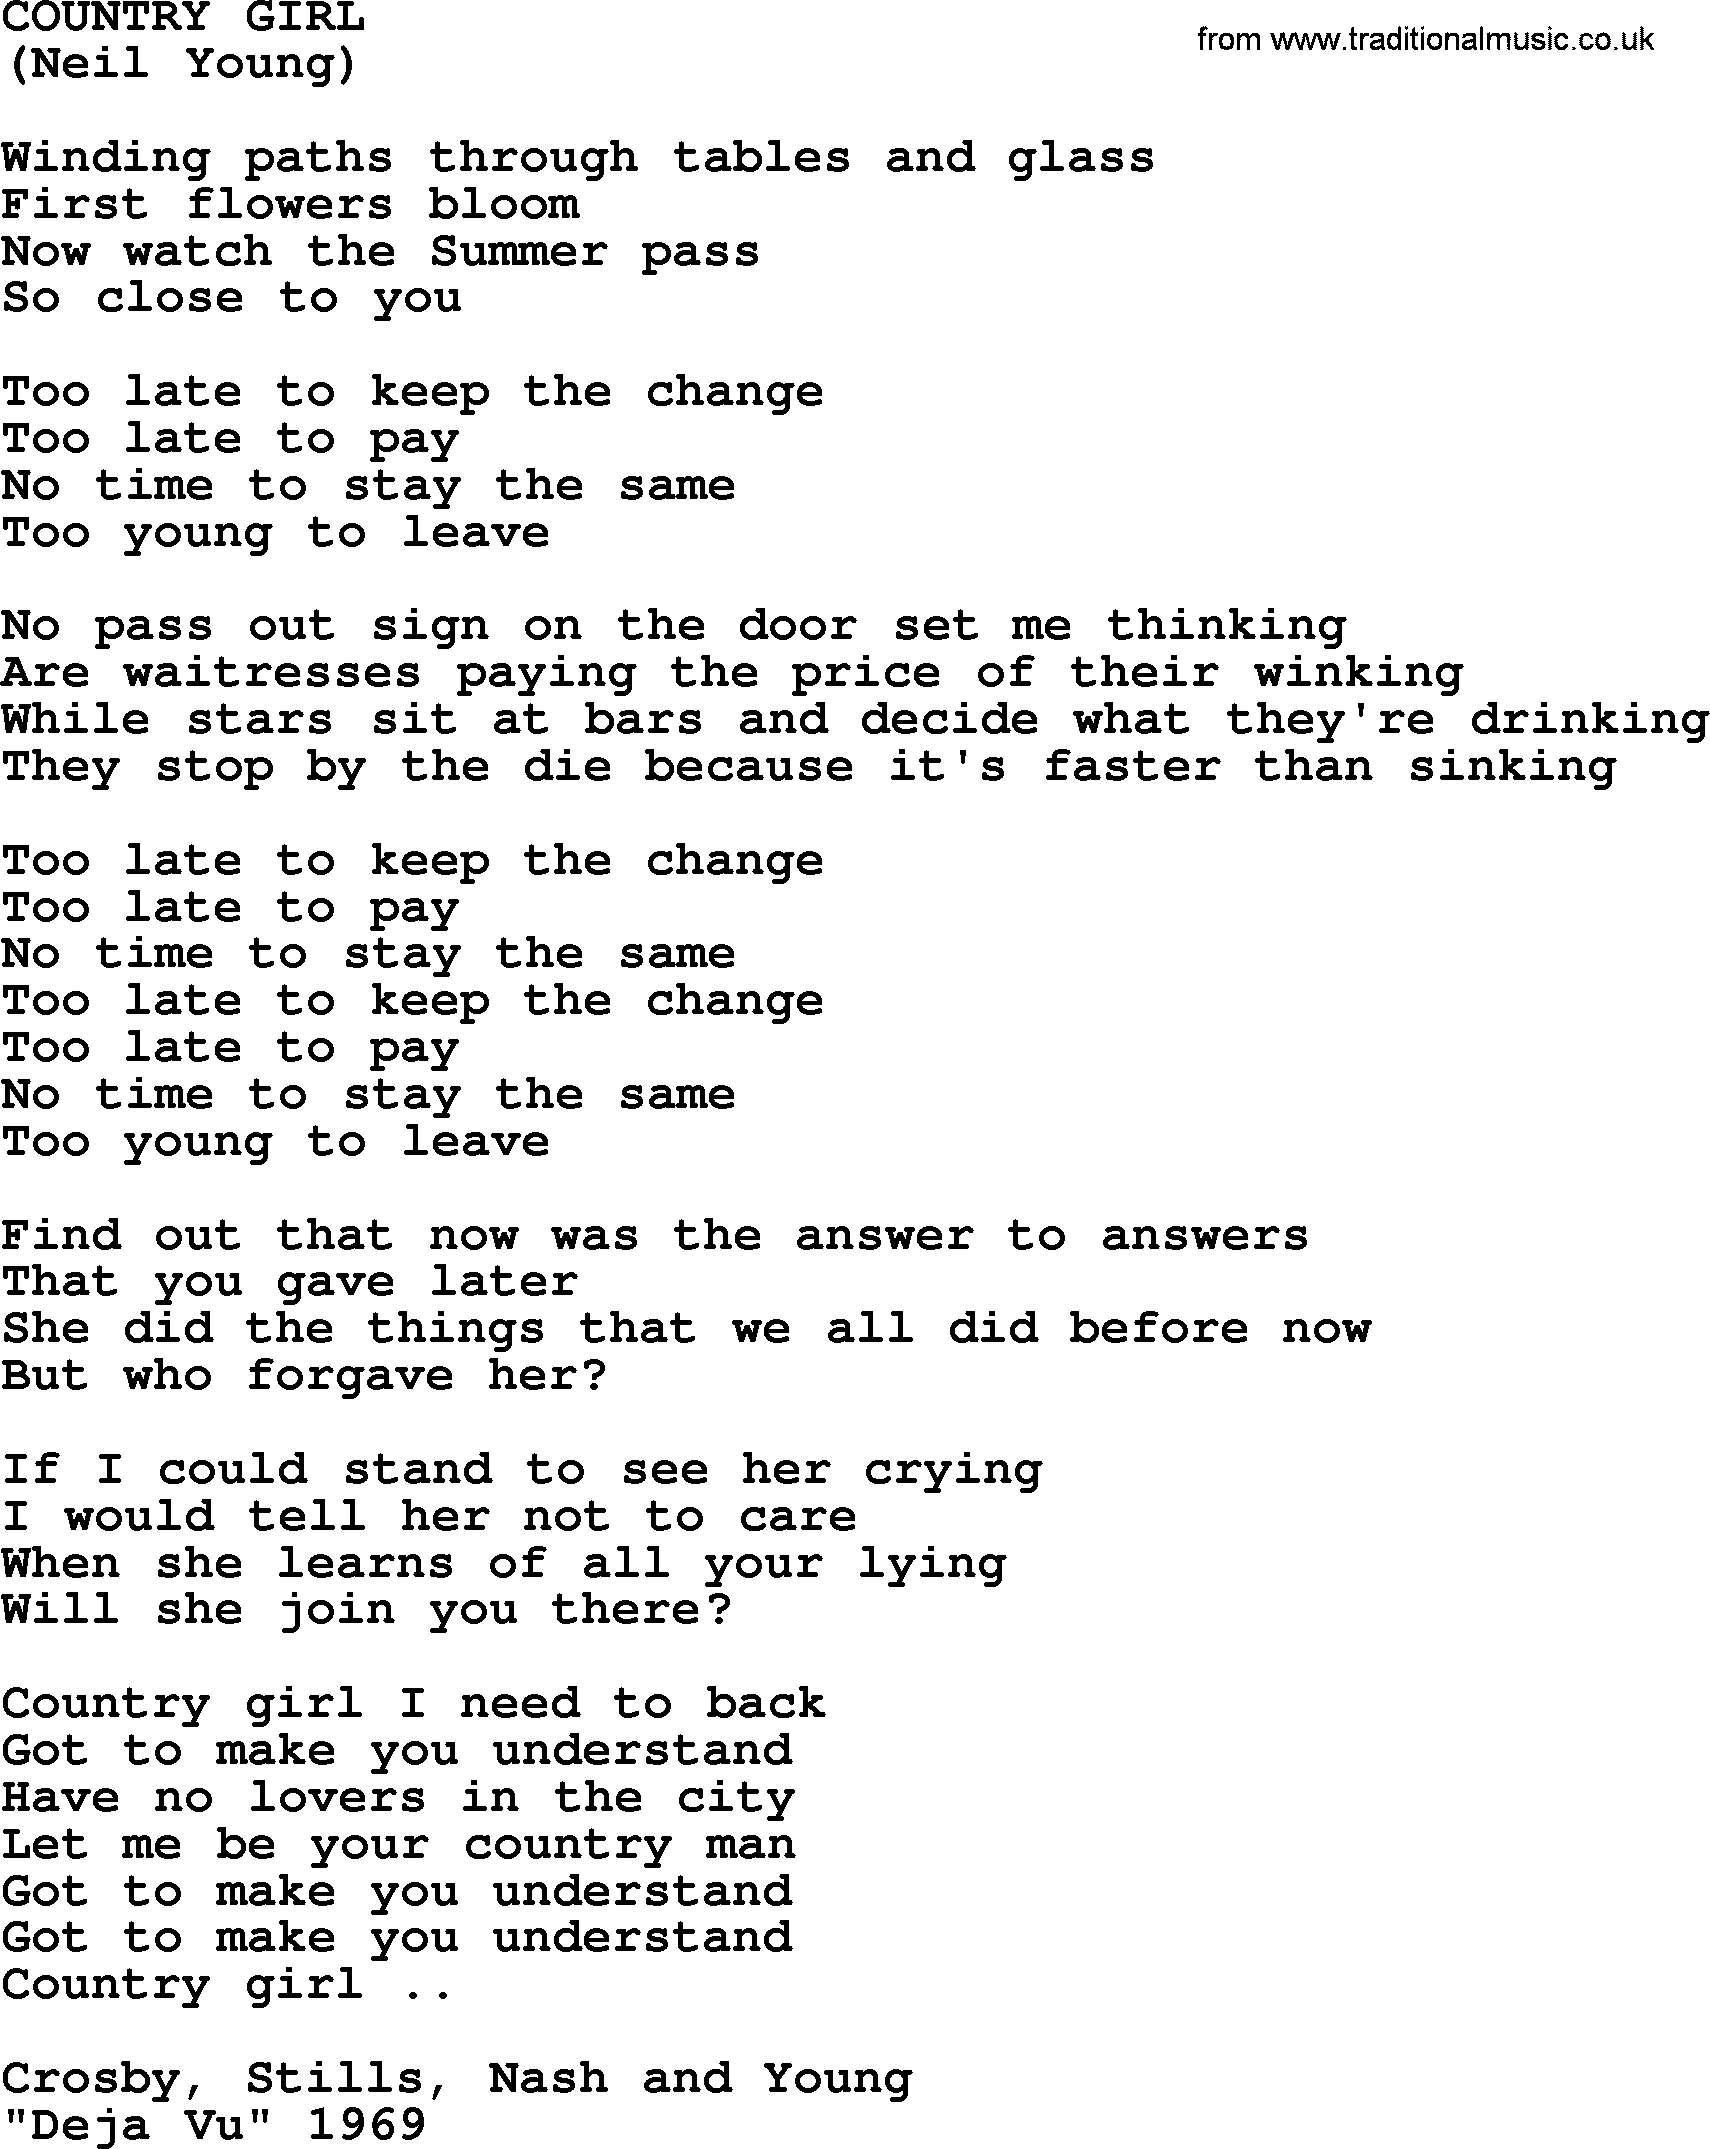 The Byrds song Country Girl, lyrics